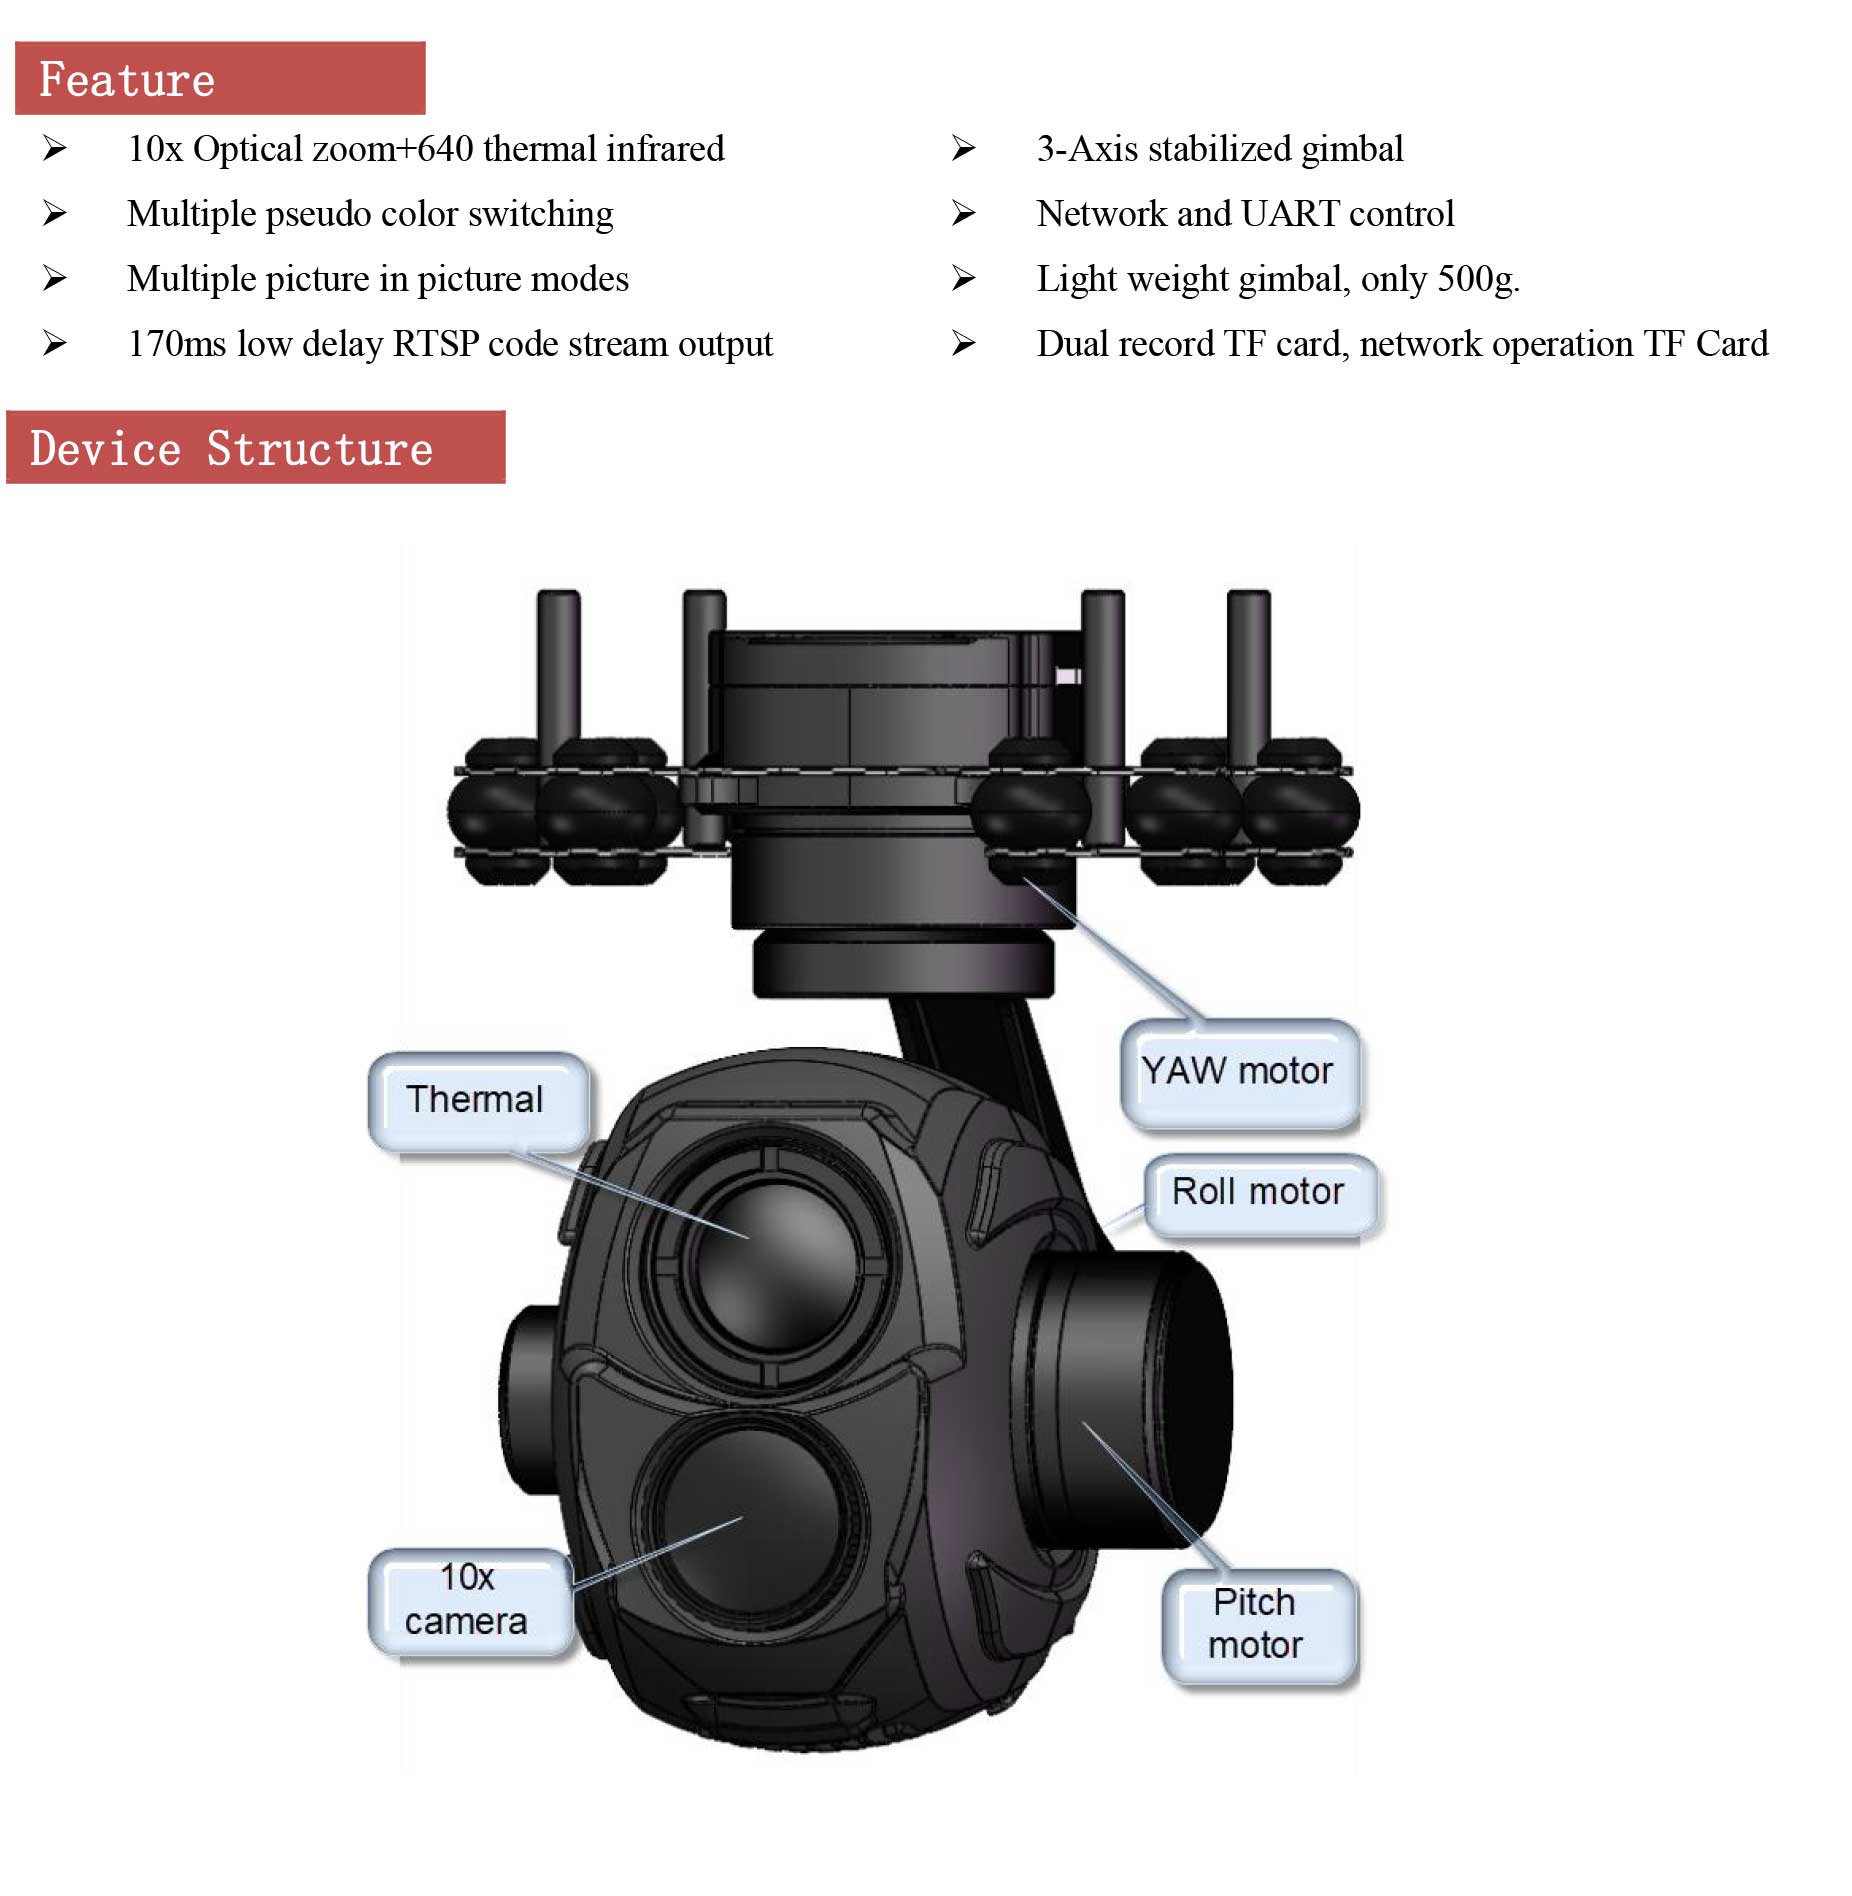 SIP10G613 10x Optical zoom camera + 640*512 thermal camera  Dual light 3-Axis Stabilized Gimbal, IP output 